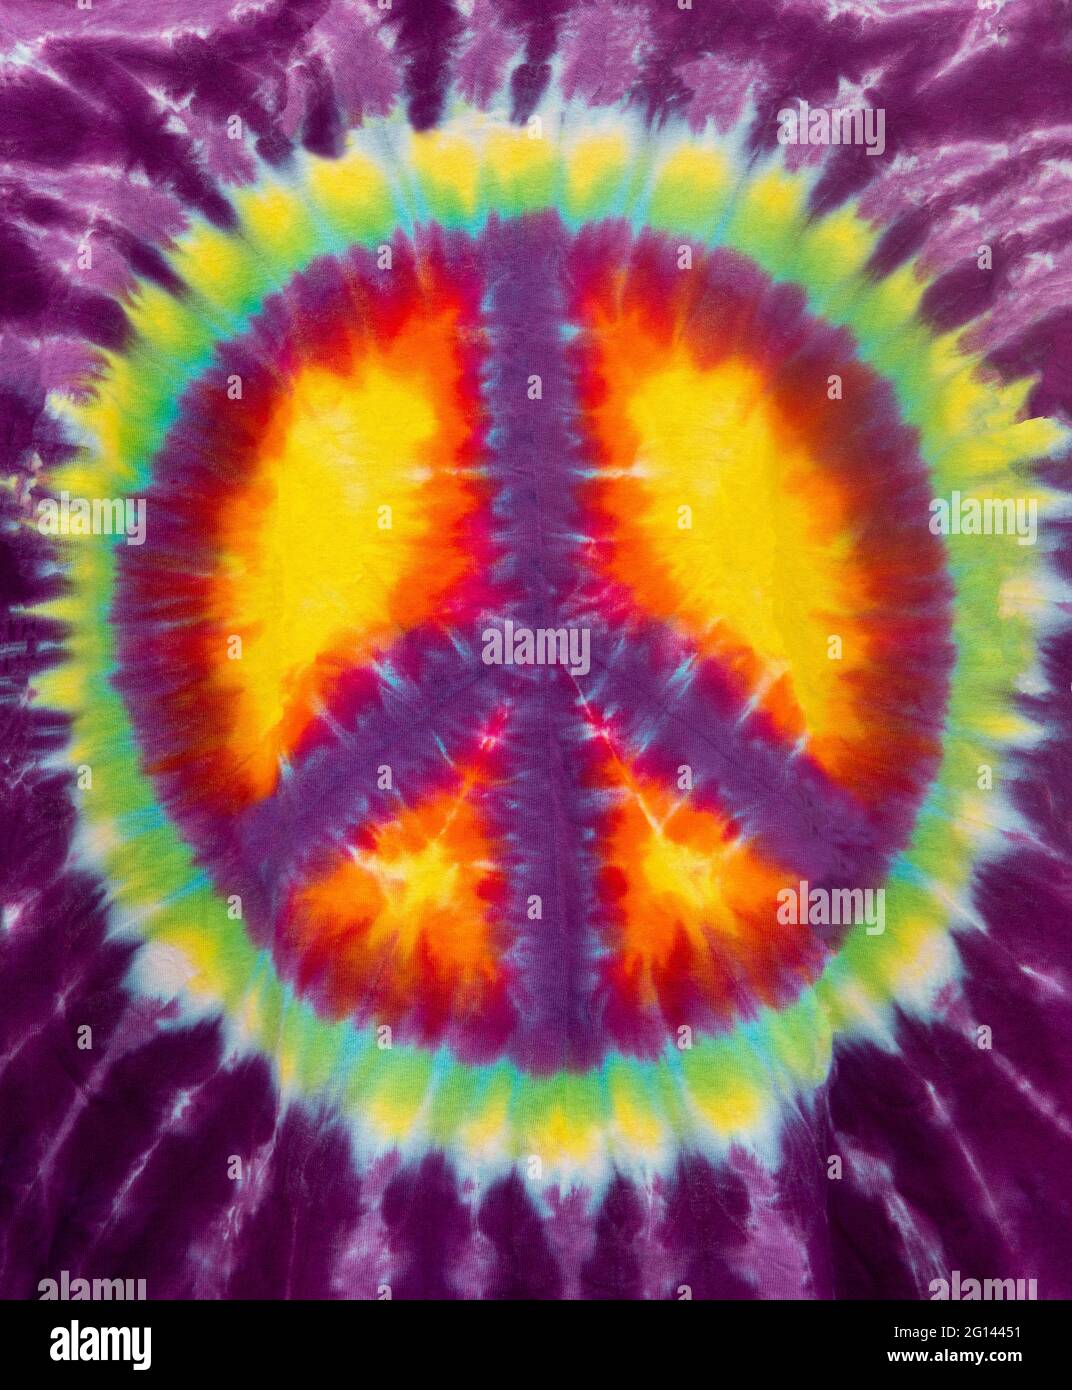 Colorful Hippie Psychedelic Peace Tie Dye Design. Stock Photo